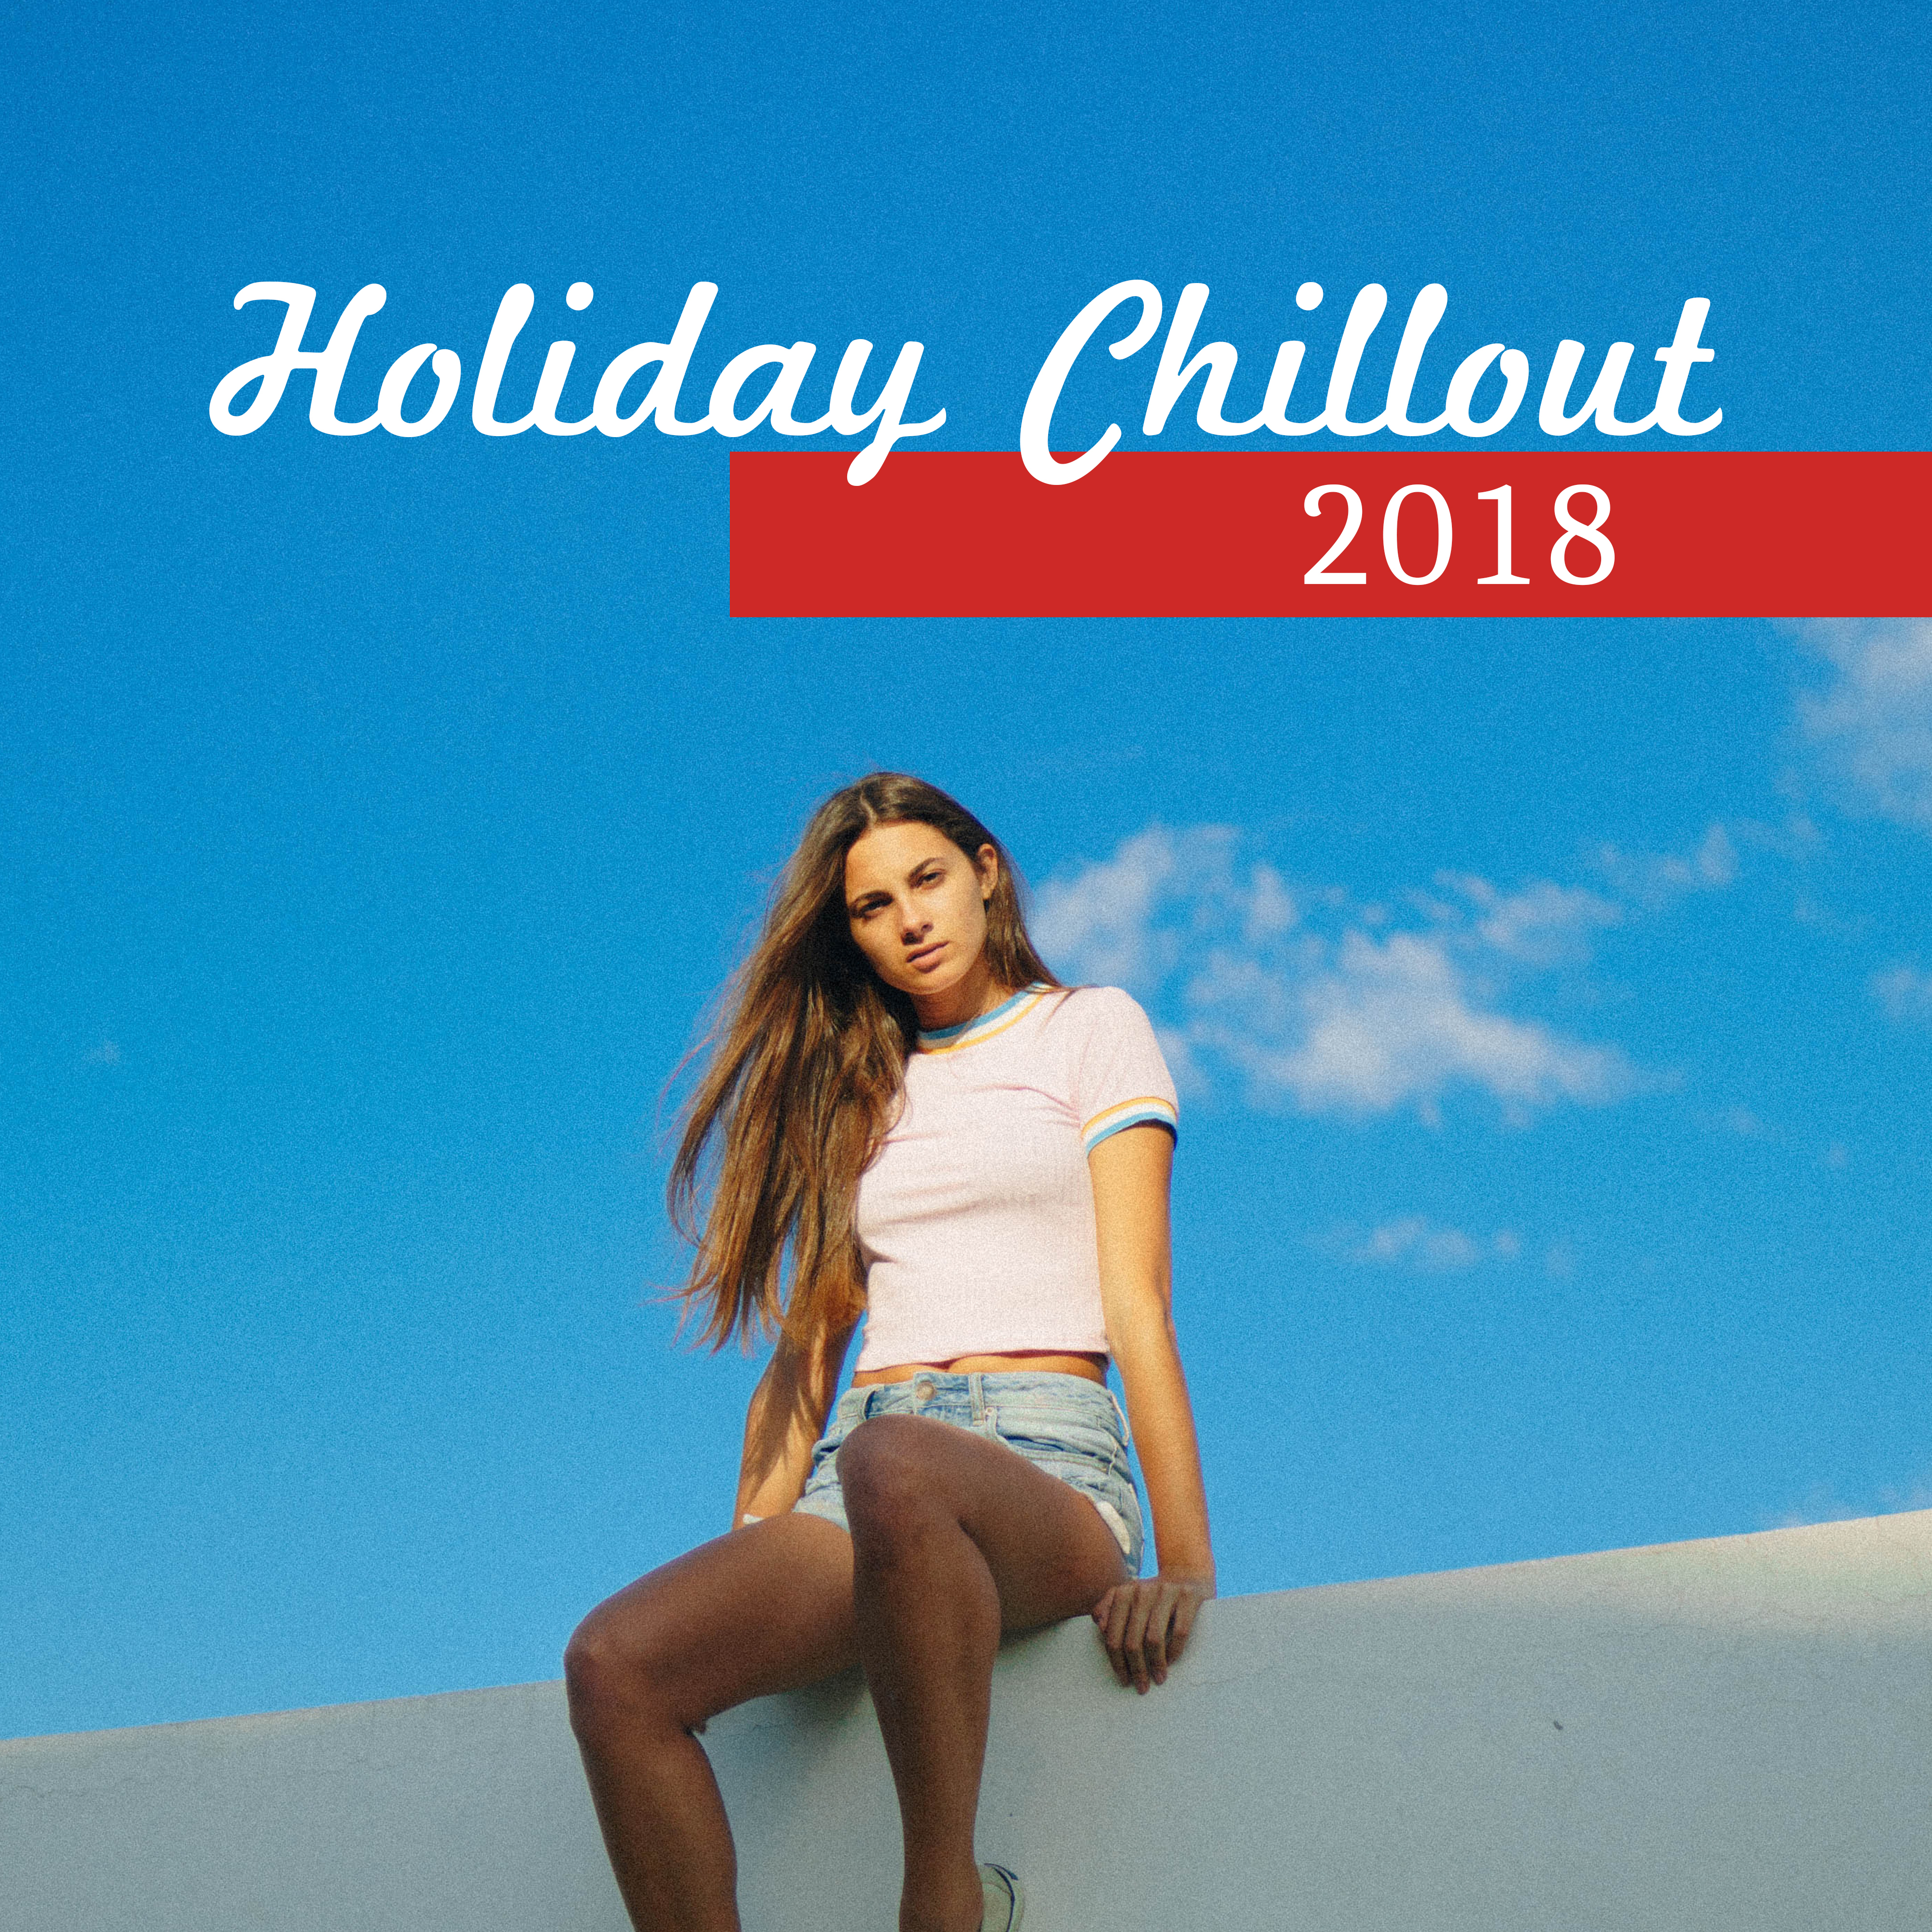 Holiday Chillout 2018